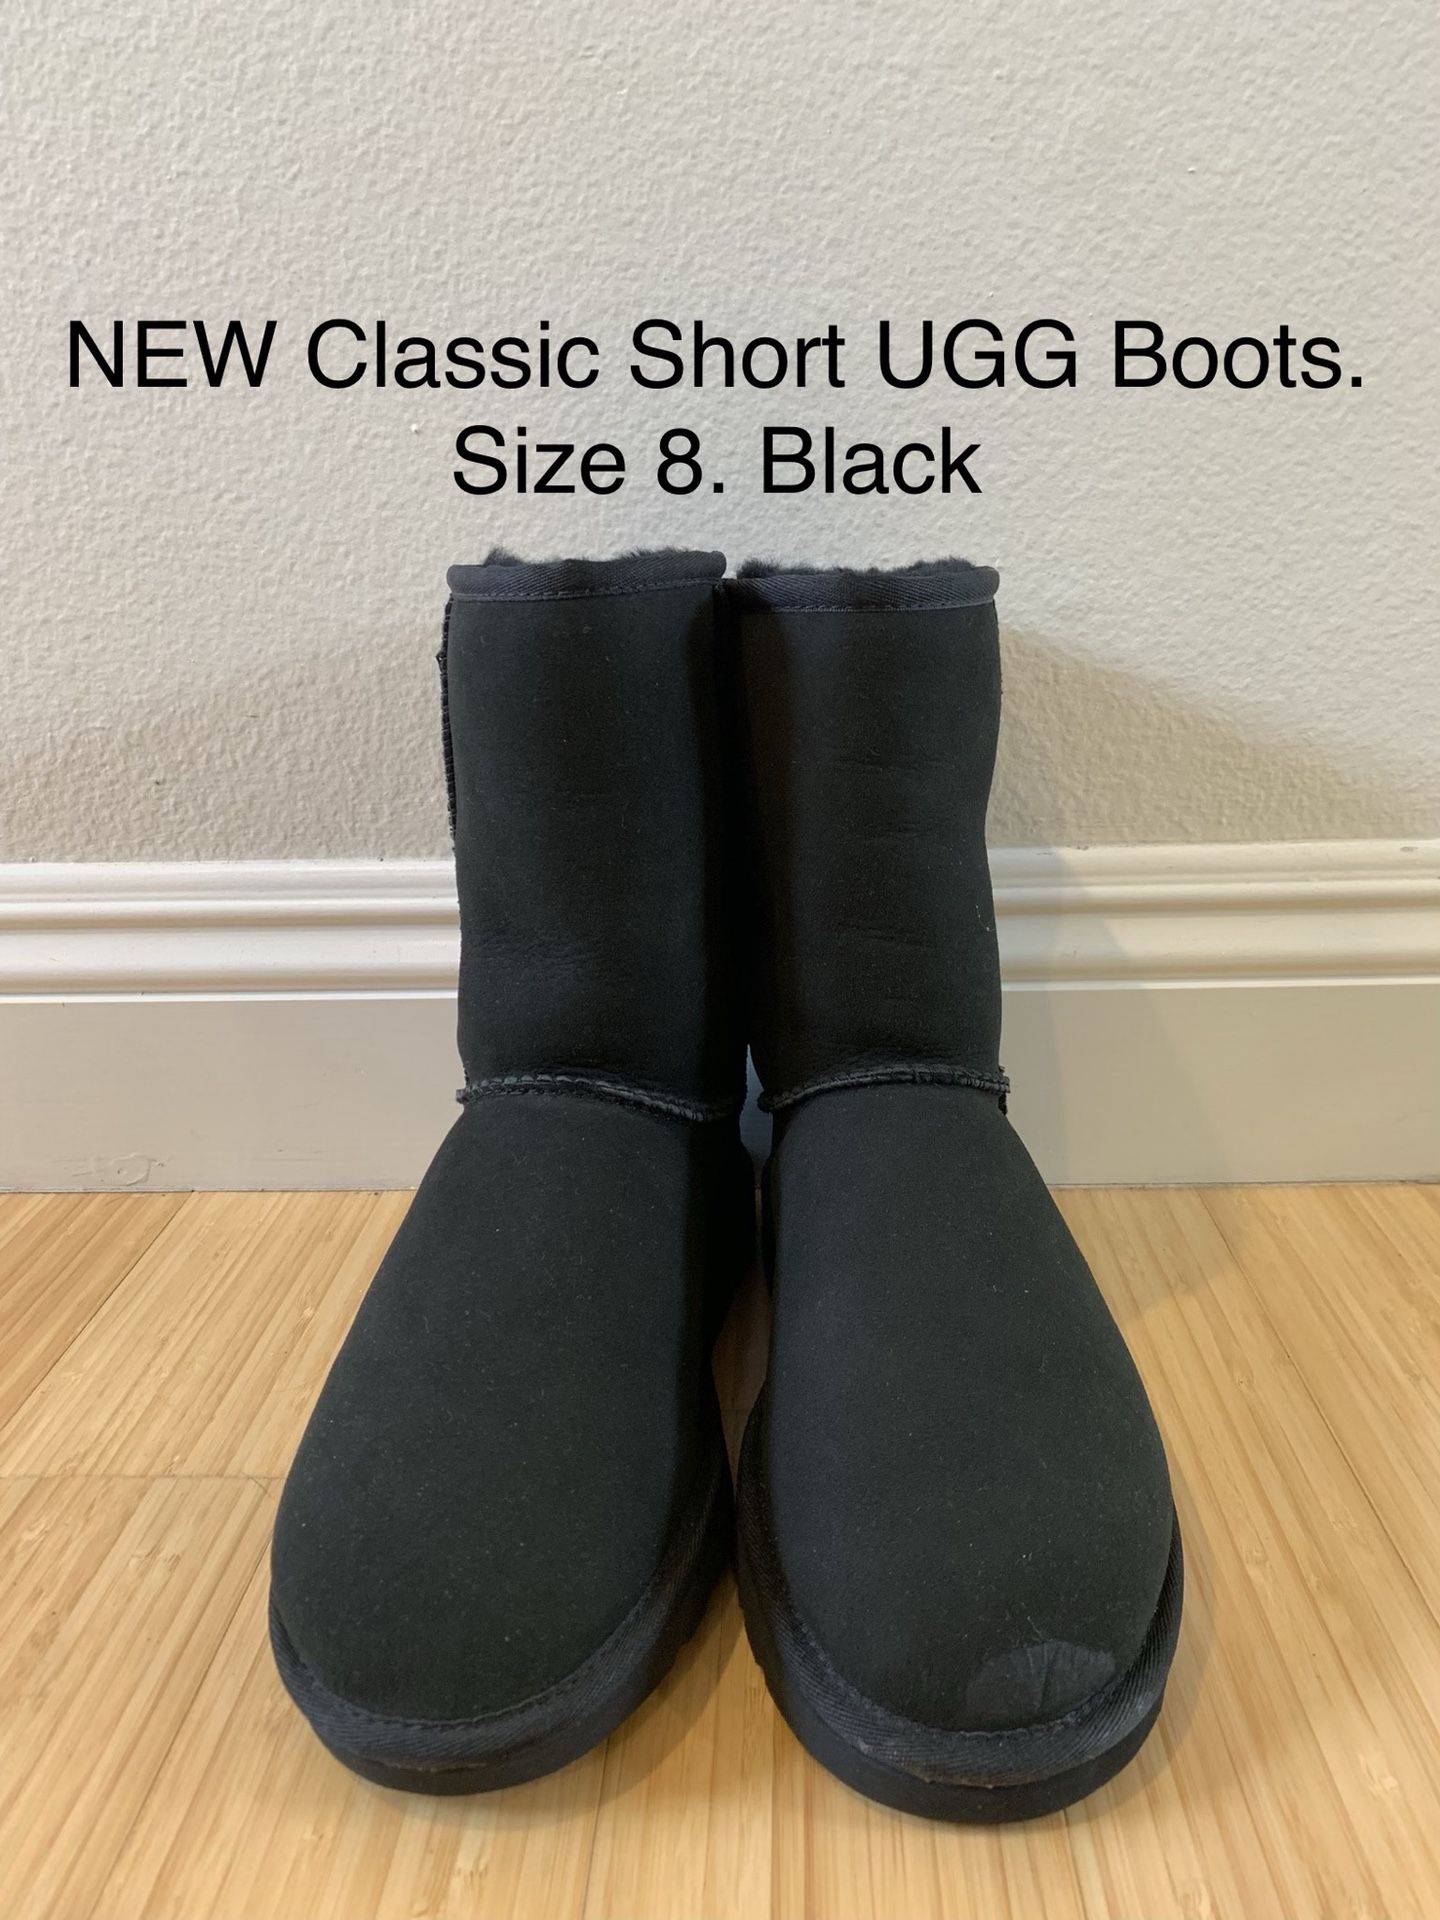 NEW Classic Short UGG Boots. Size 8. Black.